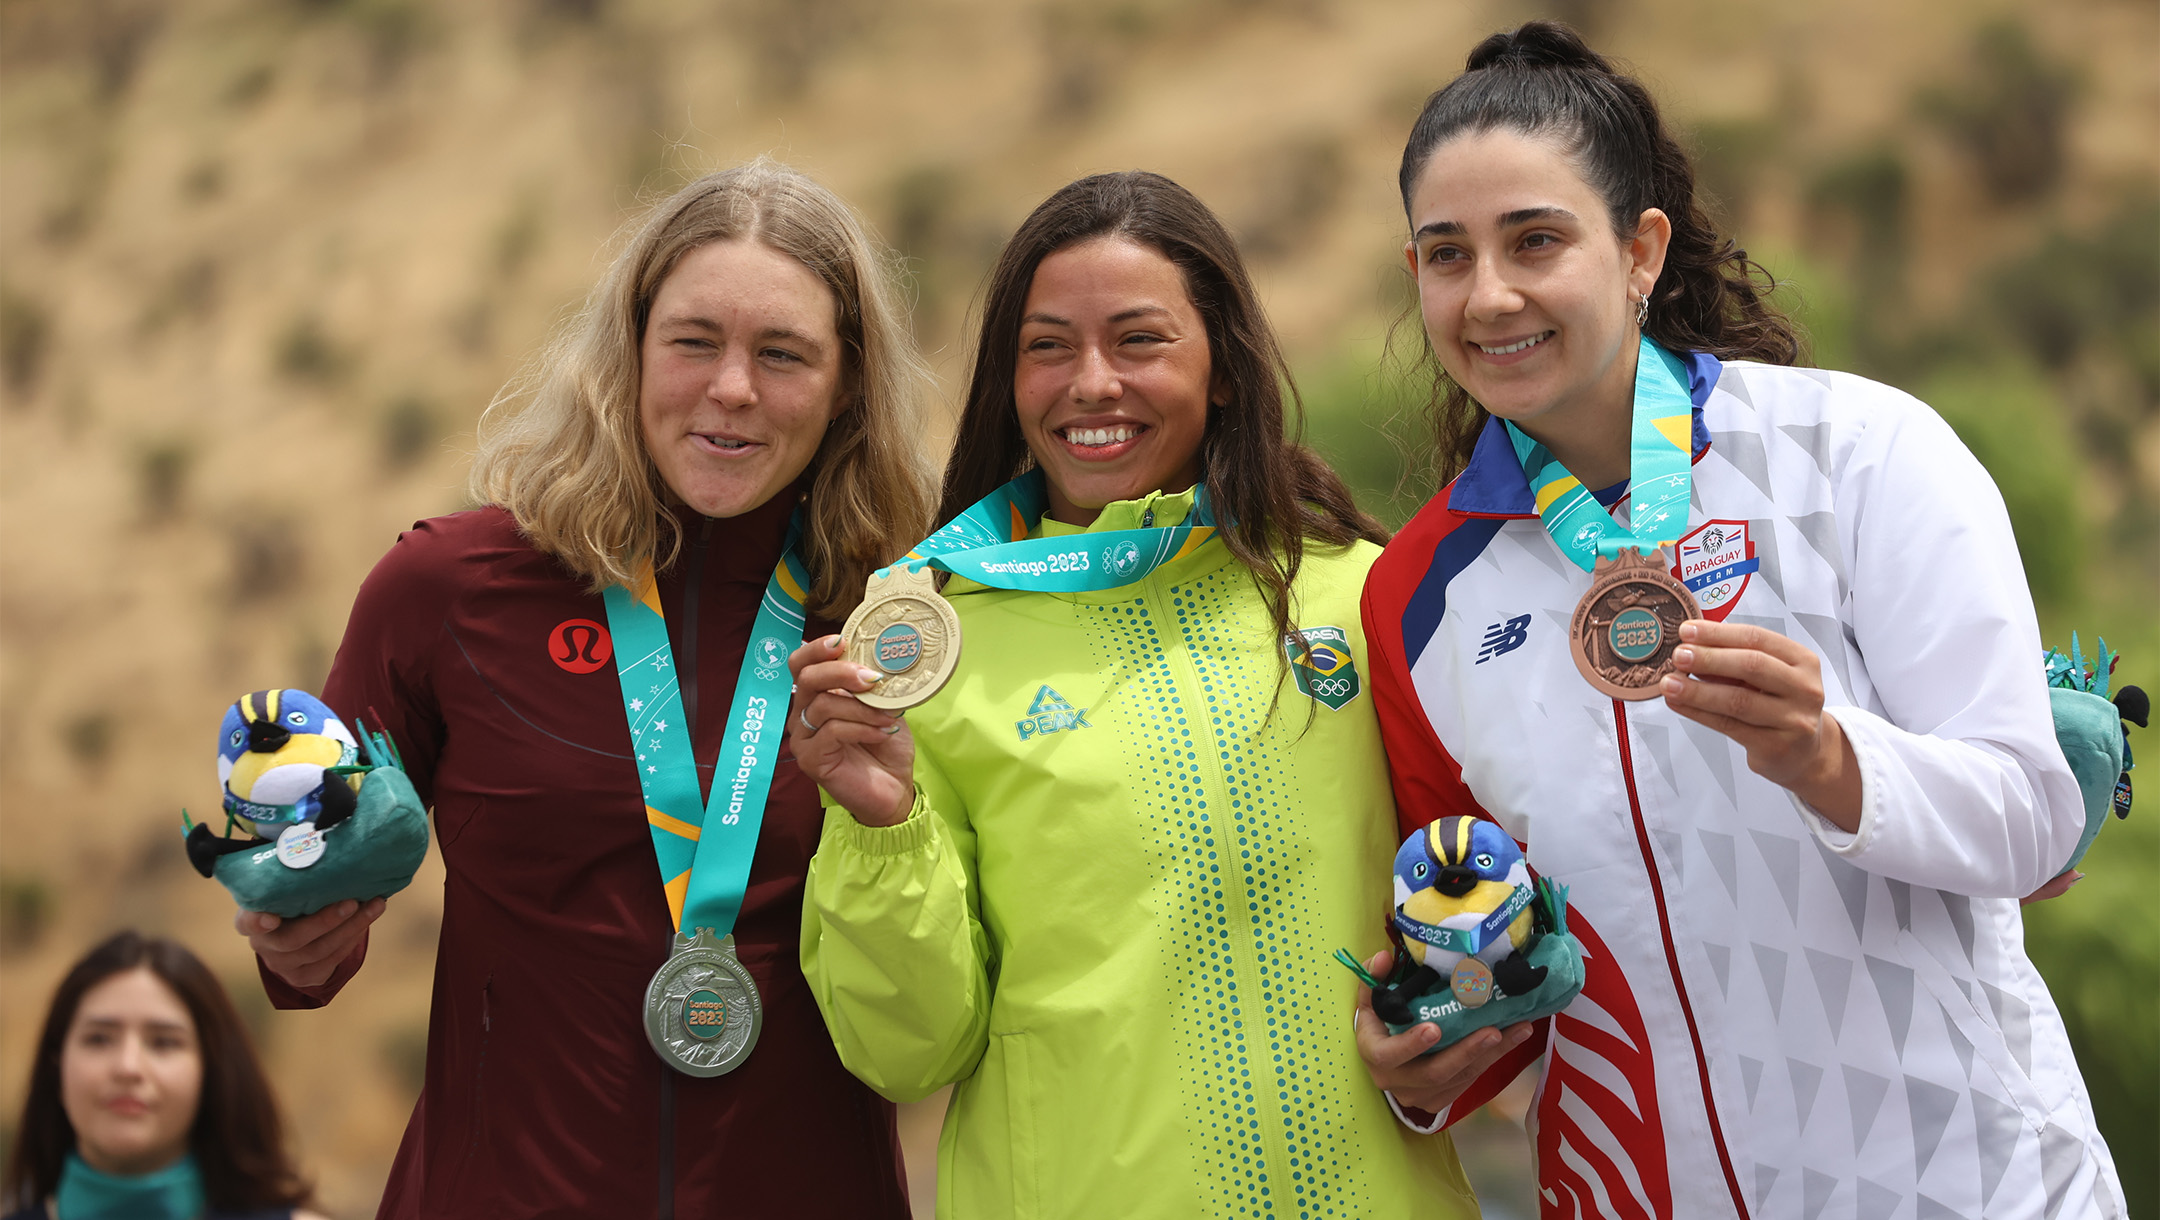 Three female athletes, including one in Team Canada attire stand on the podium.